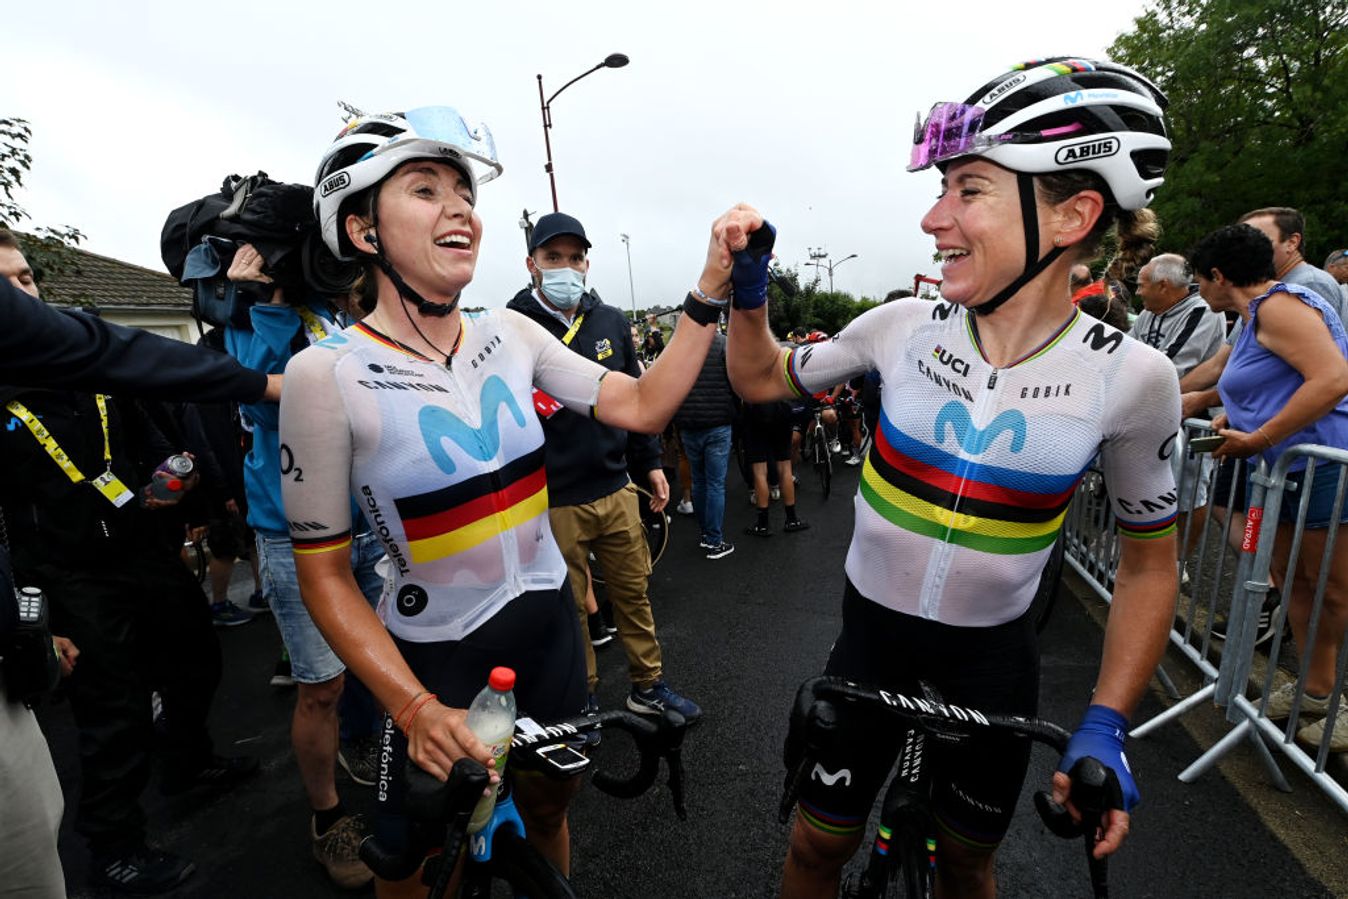 With Van Vleuten off to her retirement, the reigns of the team are now firmly in the hands of Liane Lippert 